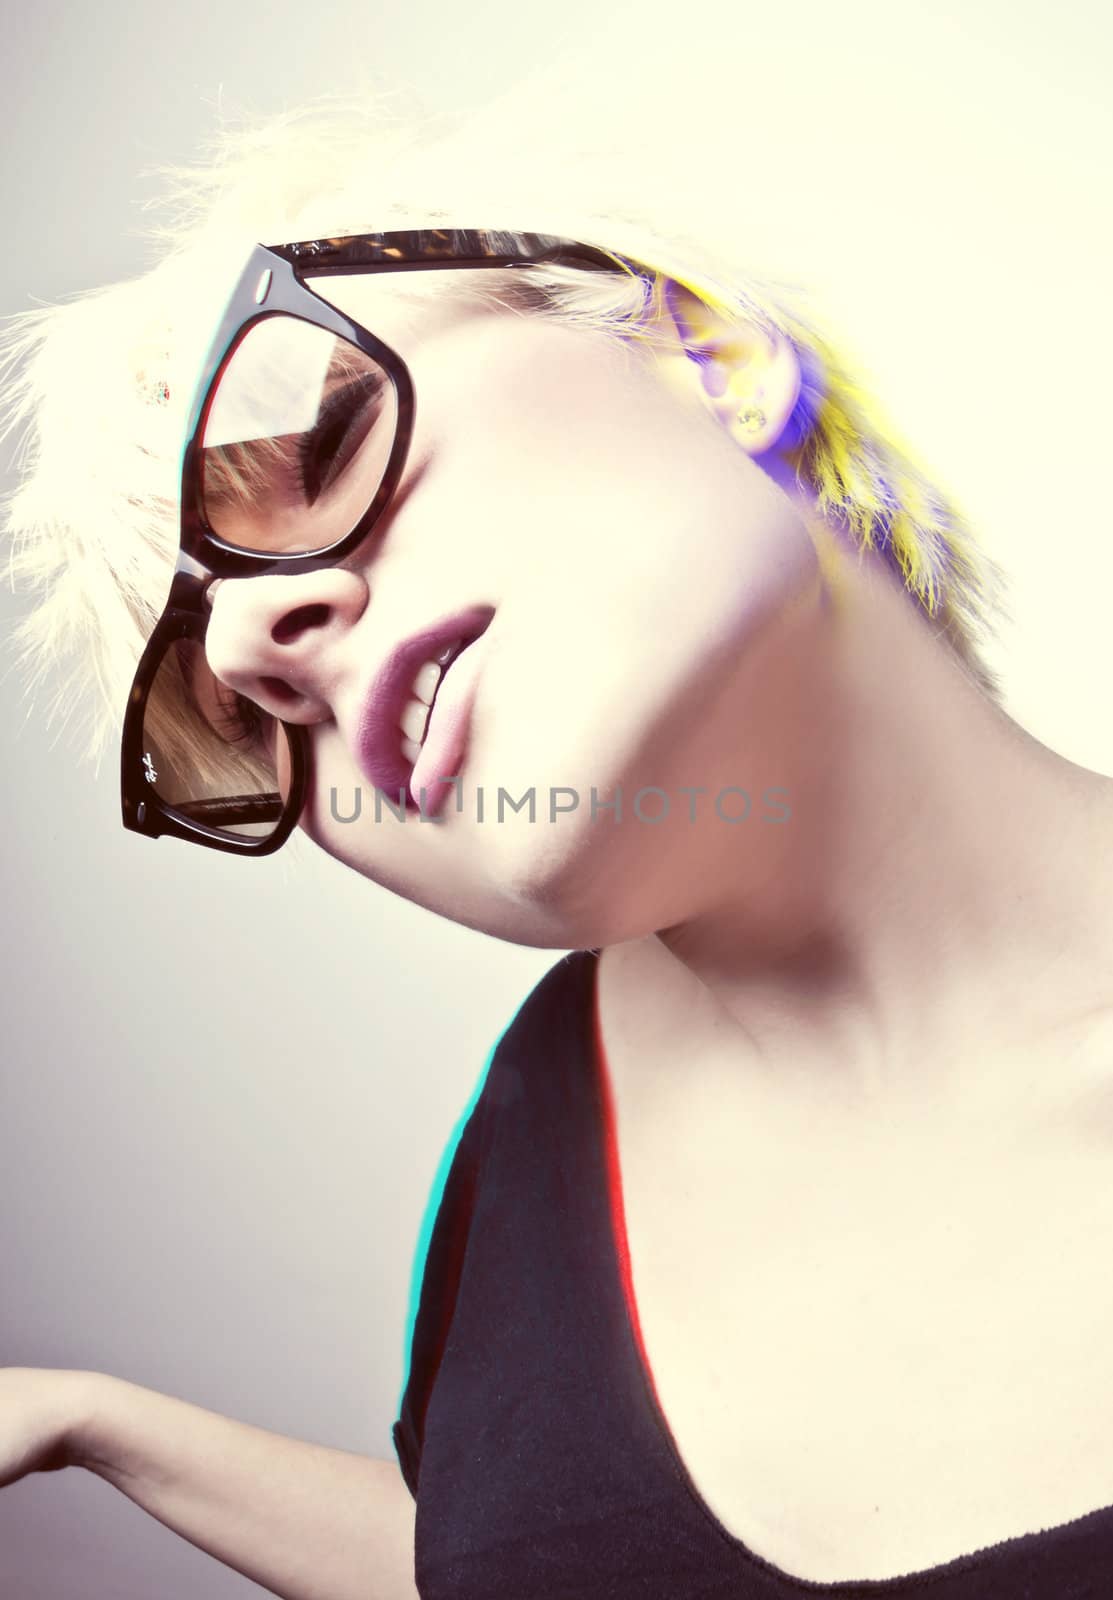 Portrait of a young, blonde girl with short hair and sunglasses